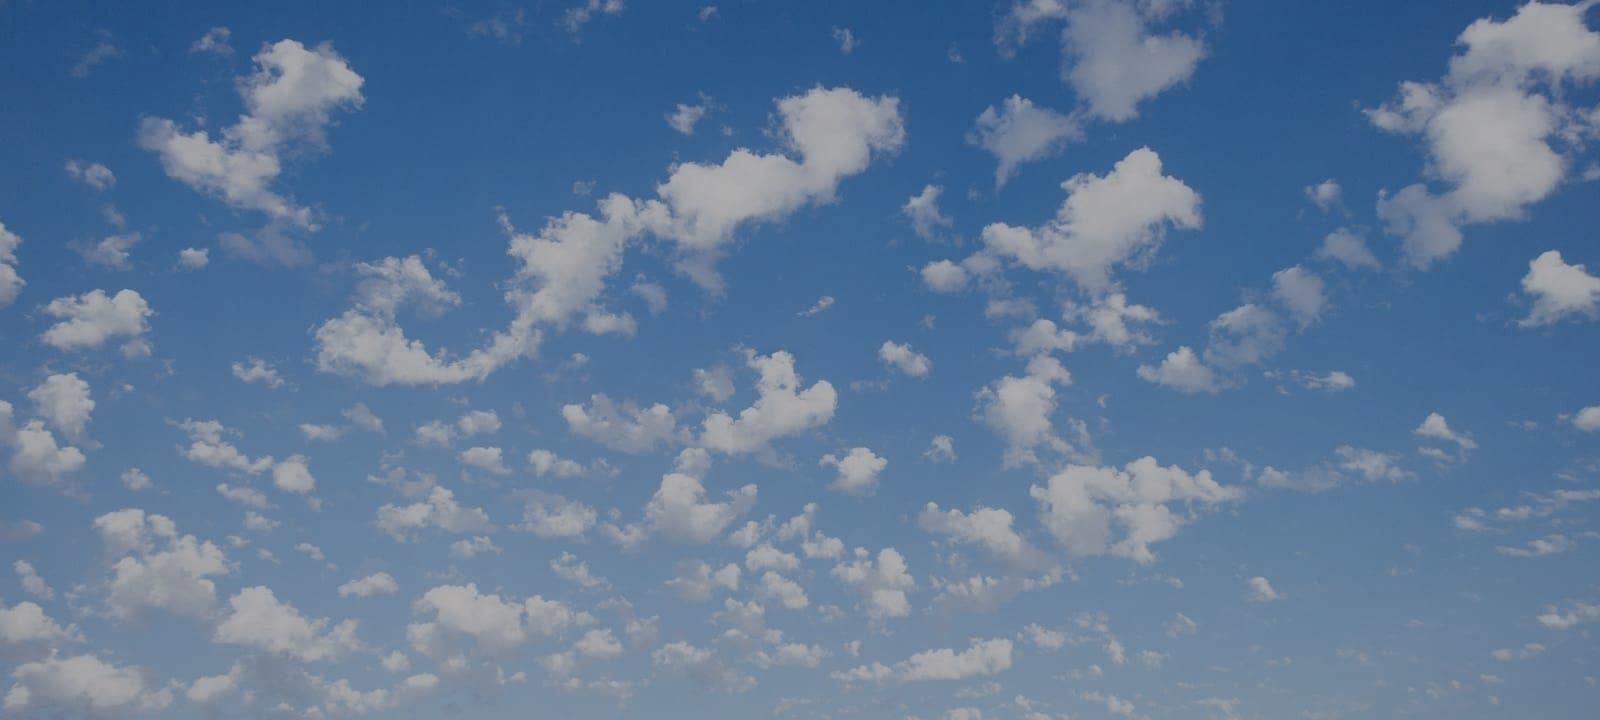 Photo of a blue sky with small puffy clouds disbursed across it.